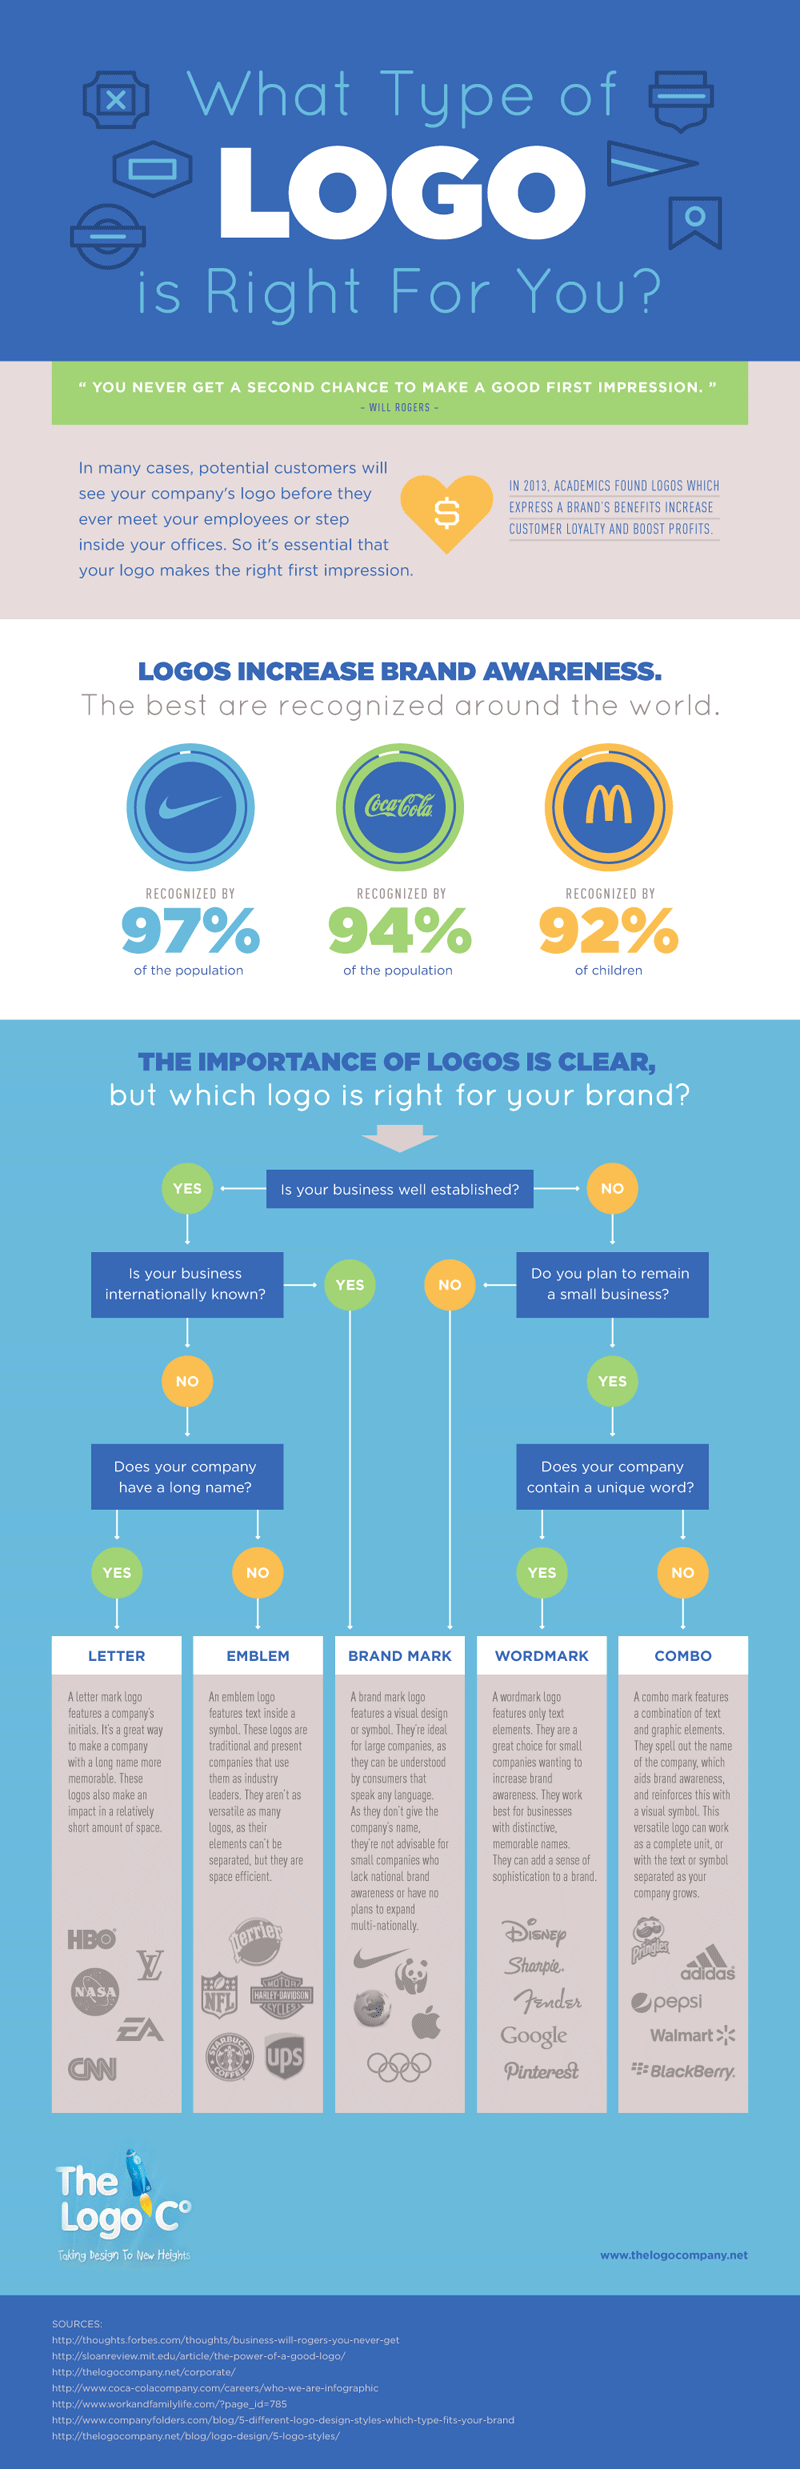 The importance of logos is clear but which logo is right for your company. Find out in this infographic.